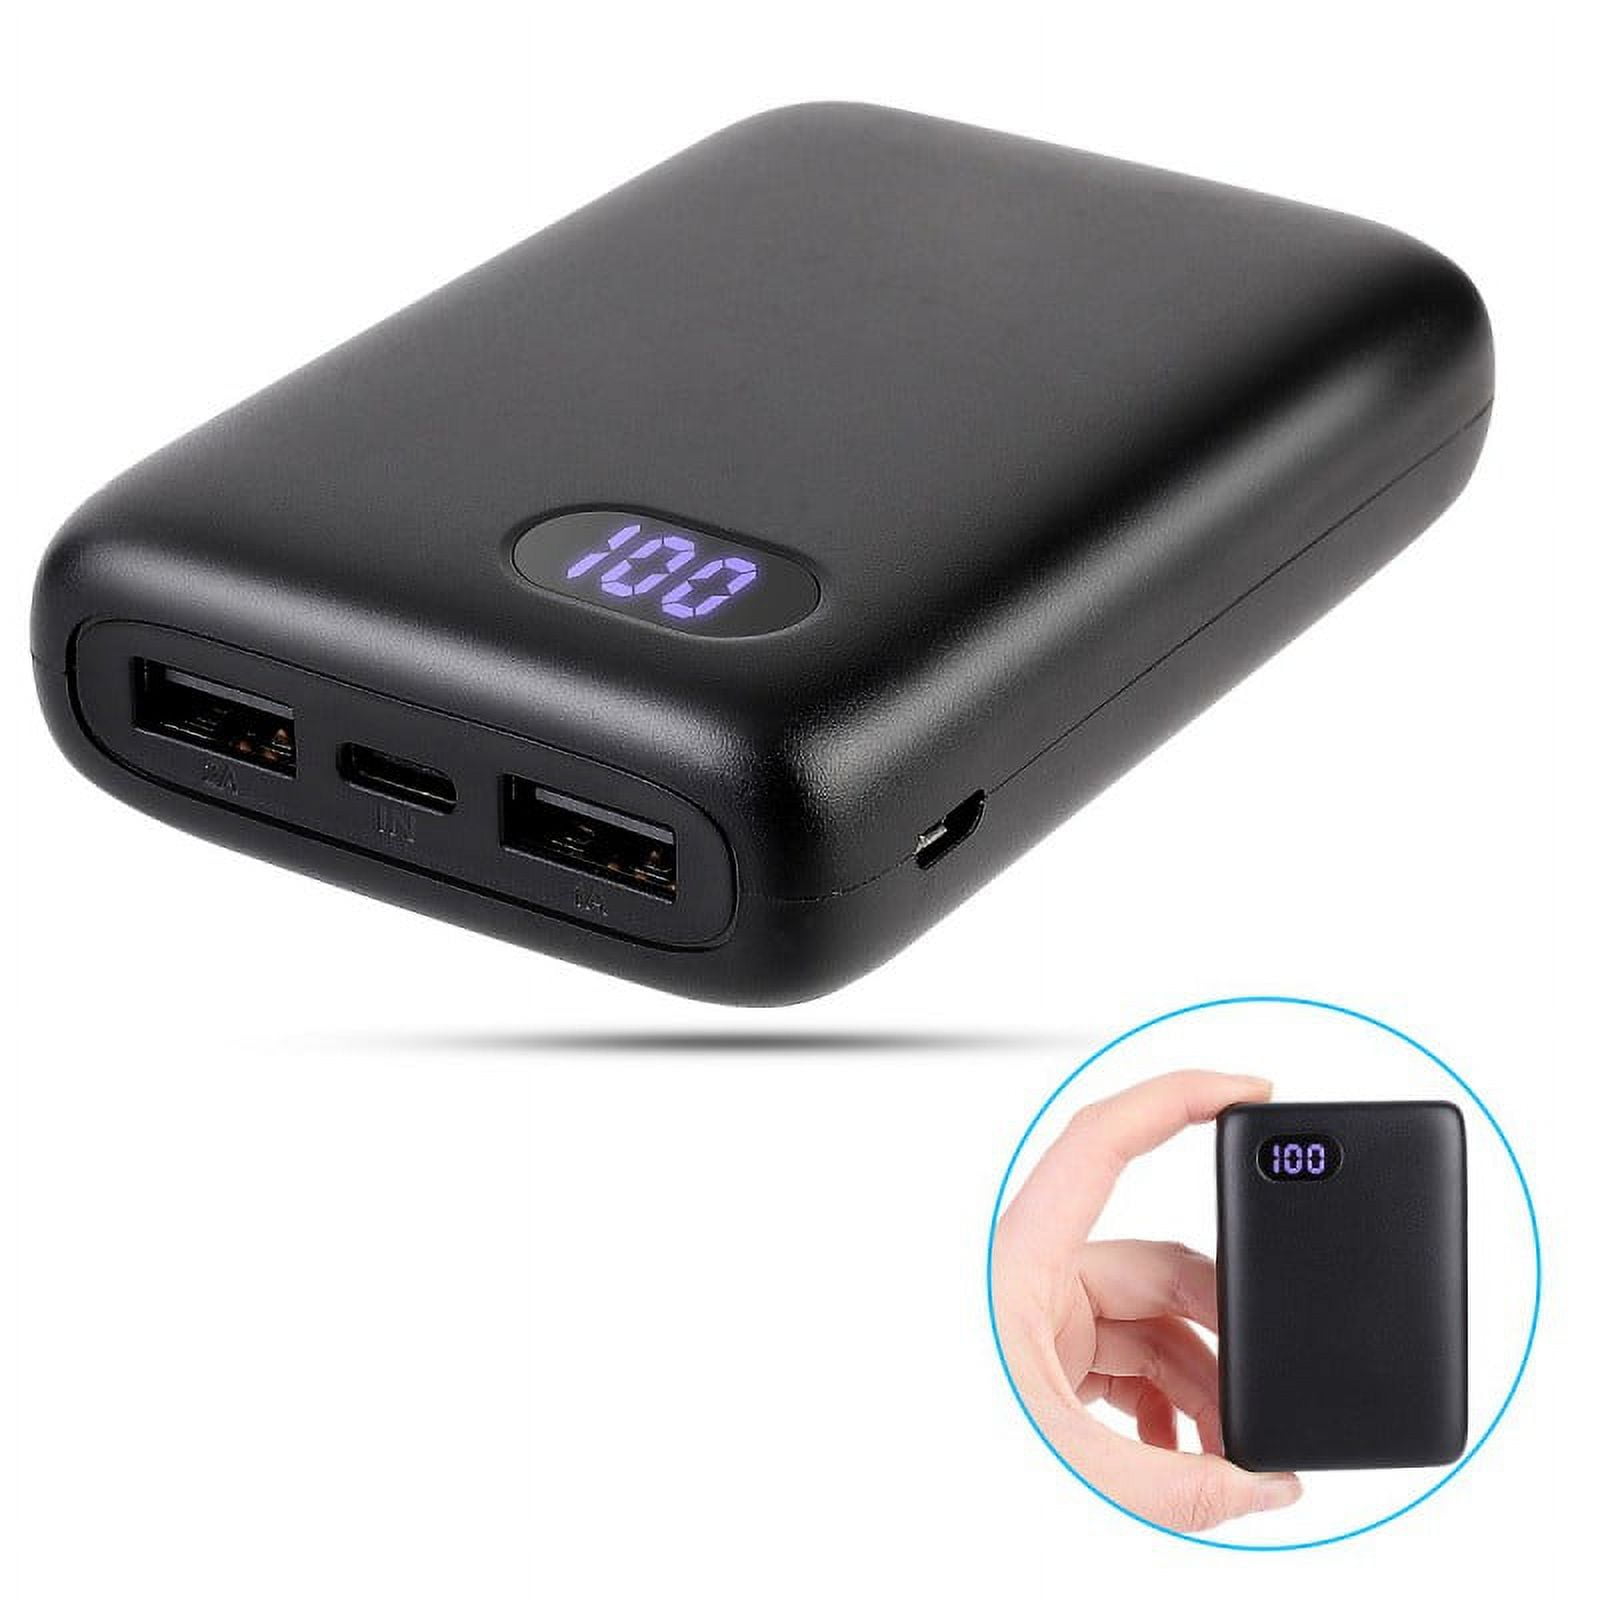 50000mAh Wireless Charger Power Bank For Iphone Samsung Fast Portable  Charger